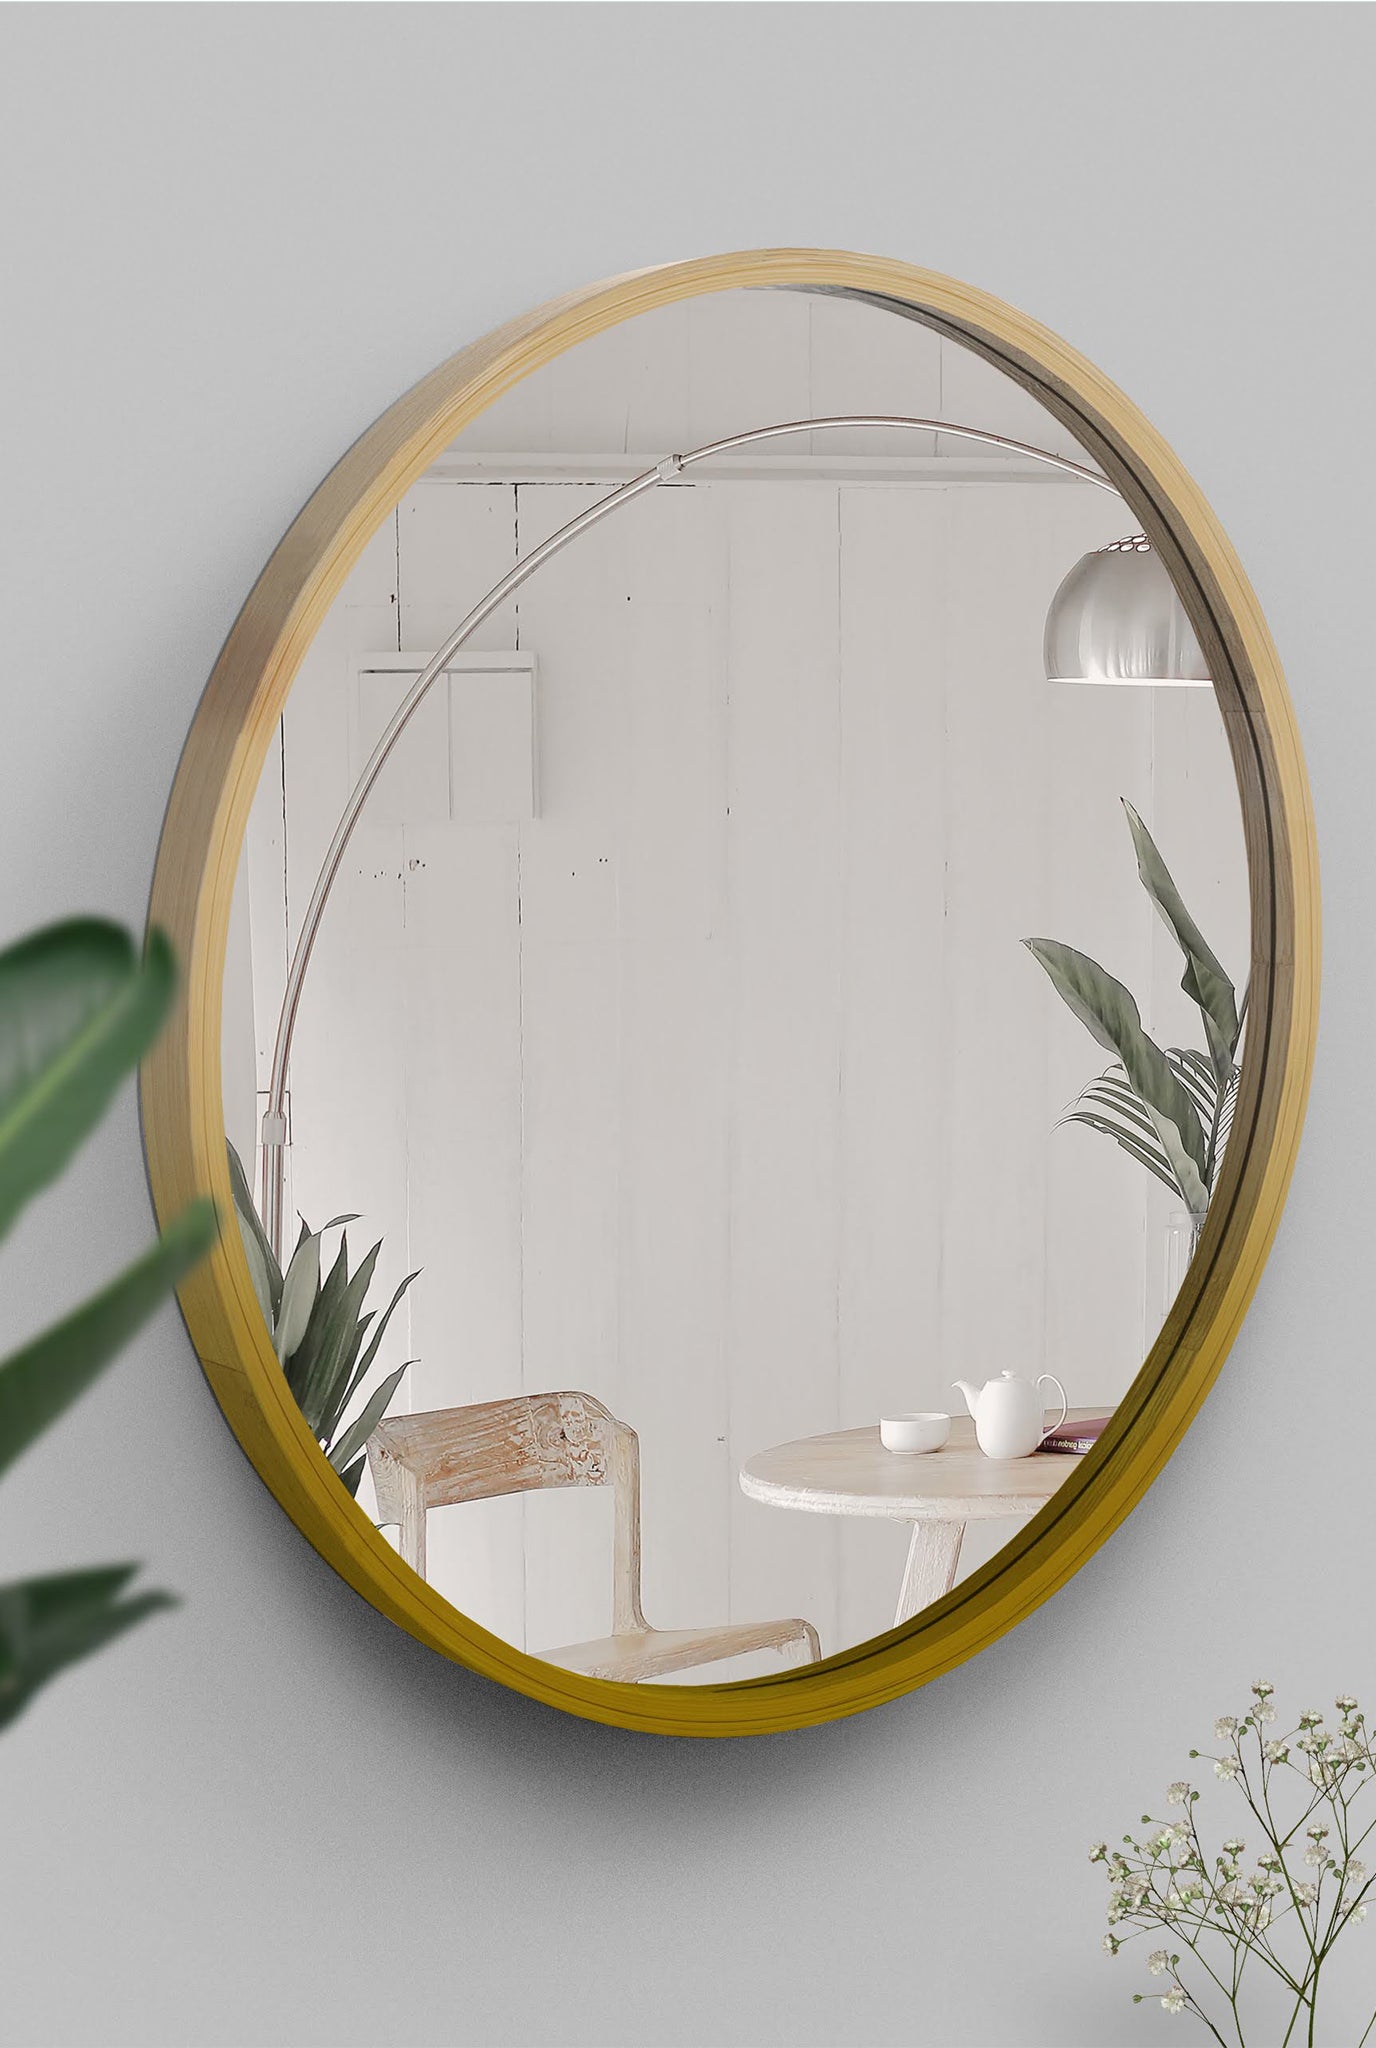 bamboo-frame-handcrafted-mirror-oval-sustainable